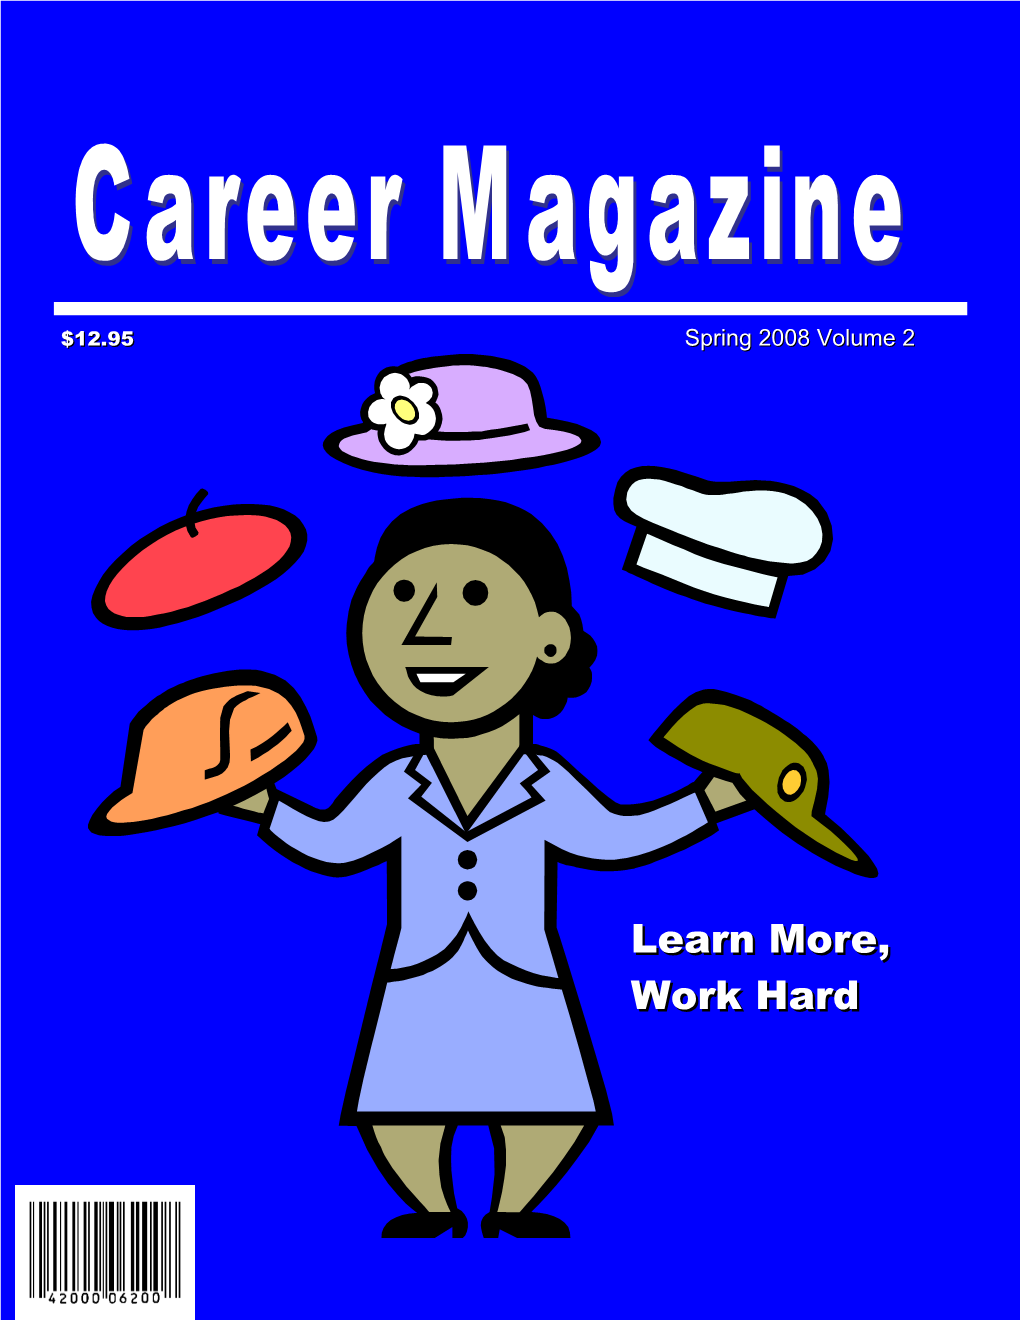 Editor and Chief of Career Magazine